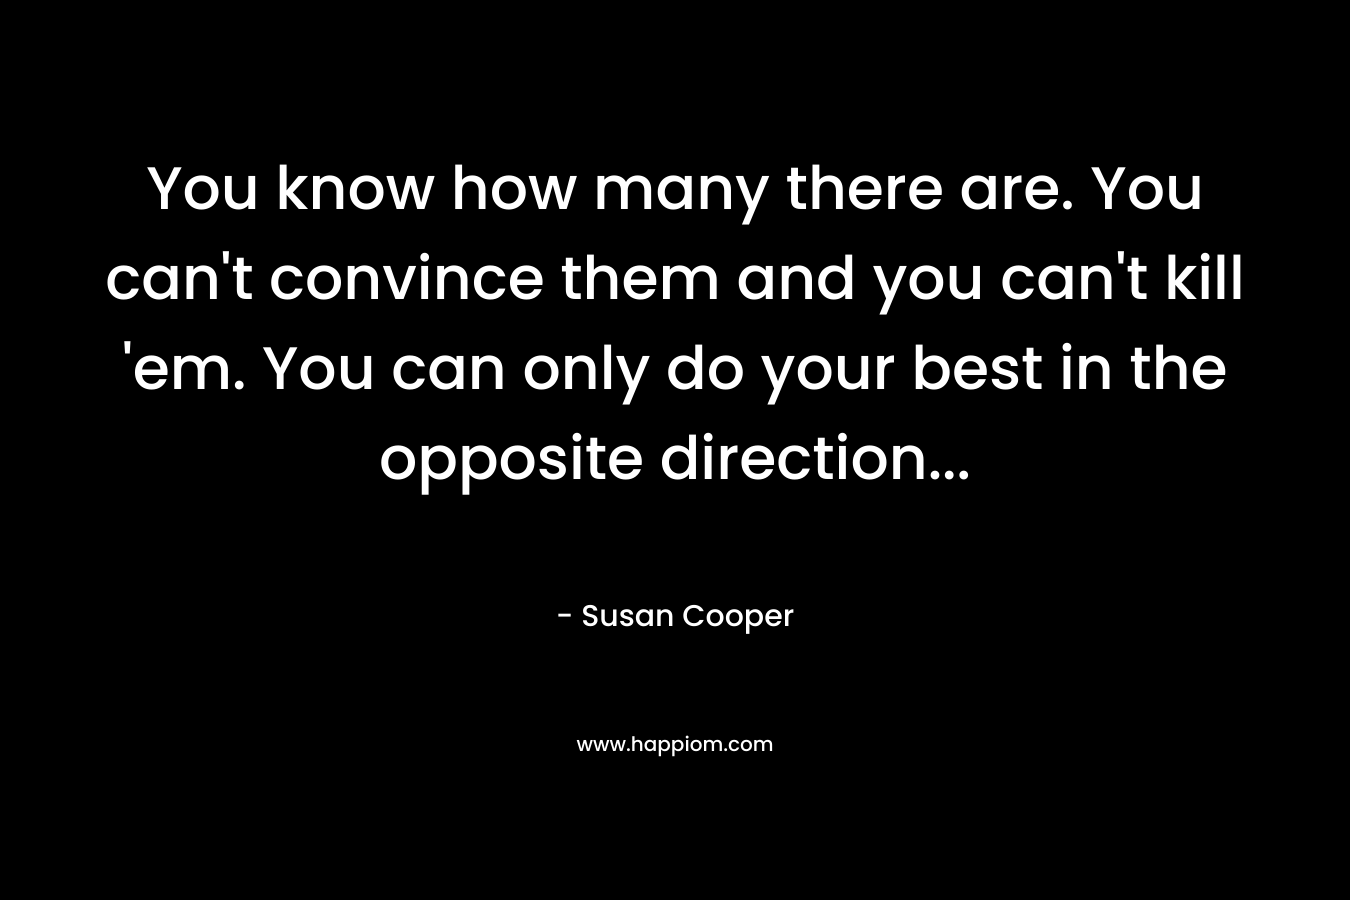 You know how many there are. You can't convince them and you can't kill 'em. You can only do your best in the opposite direction...